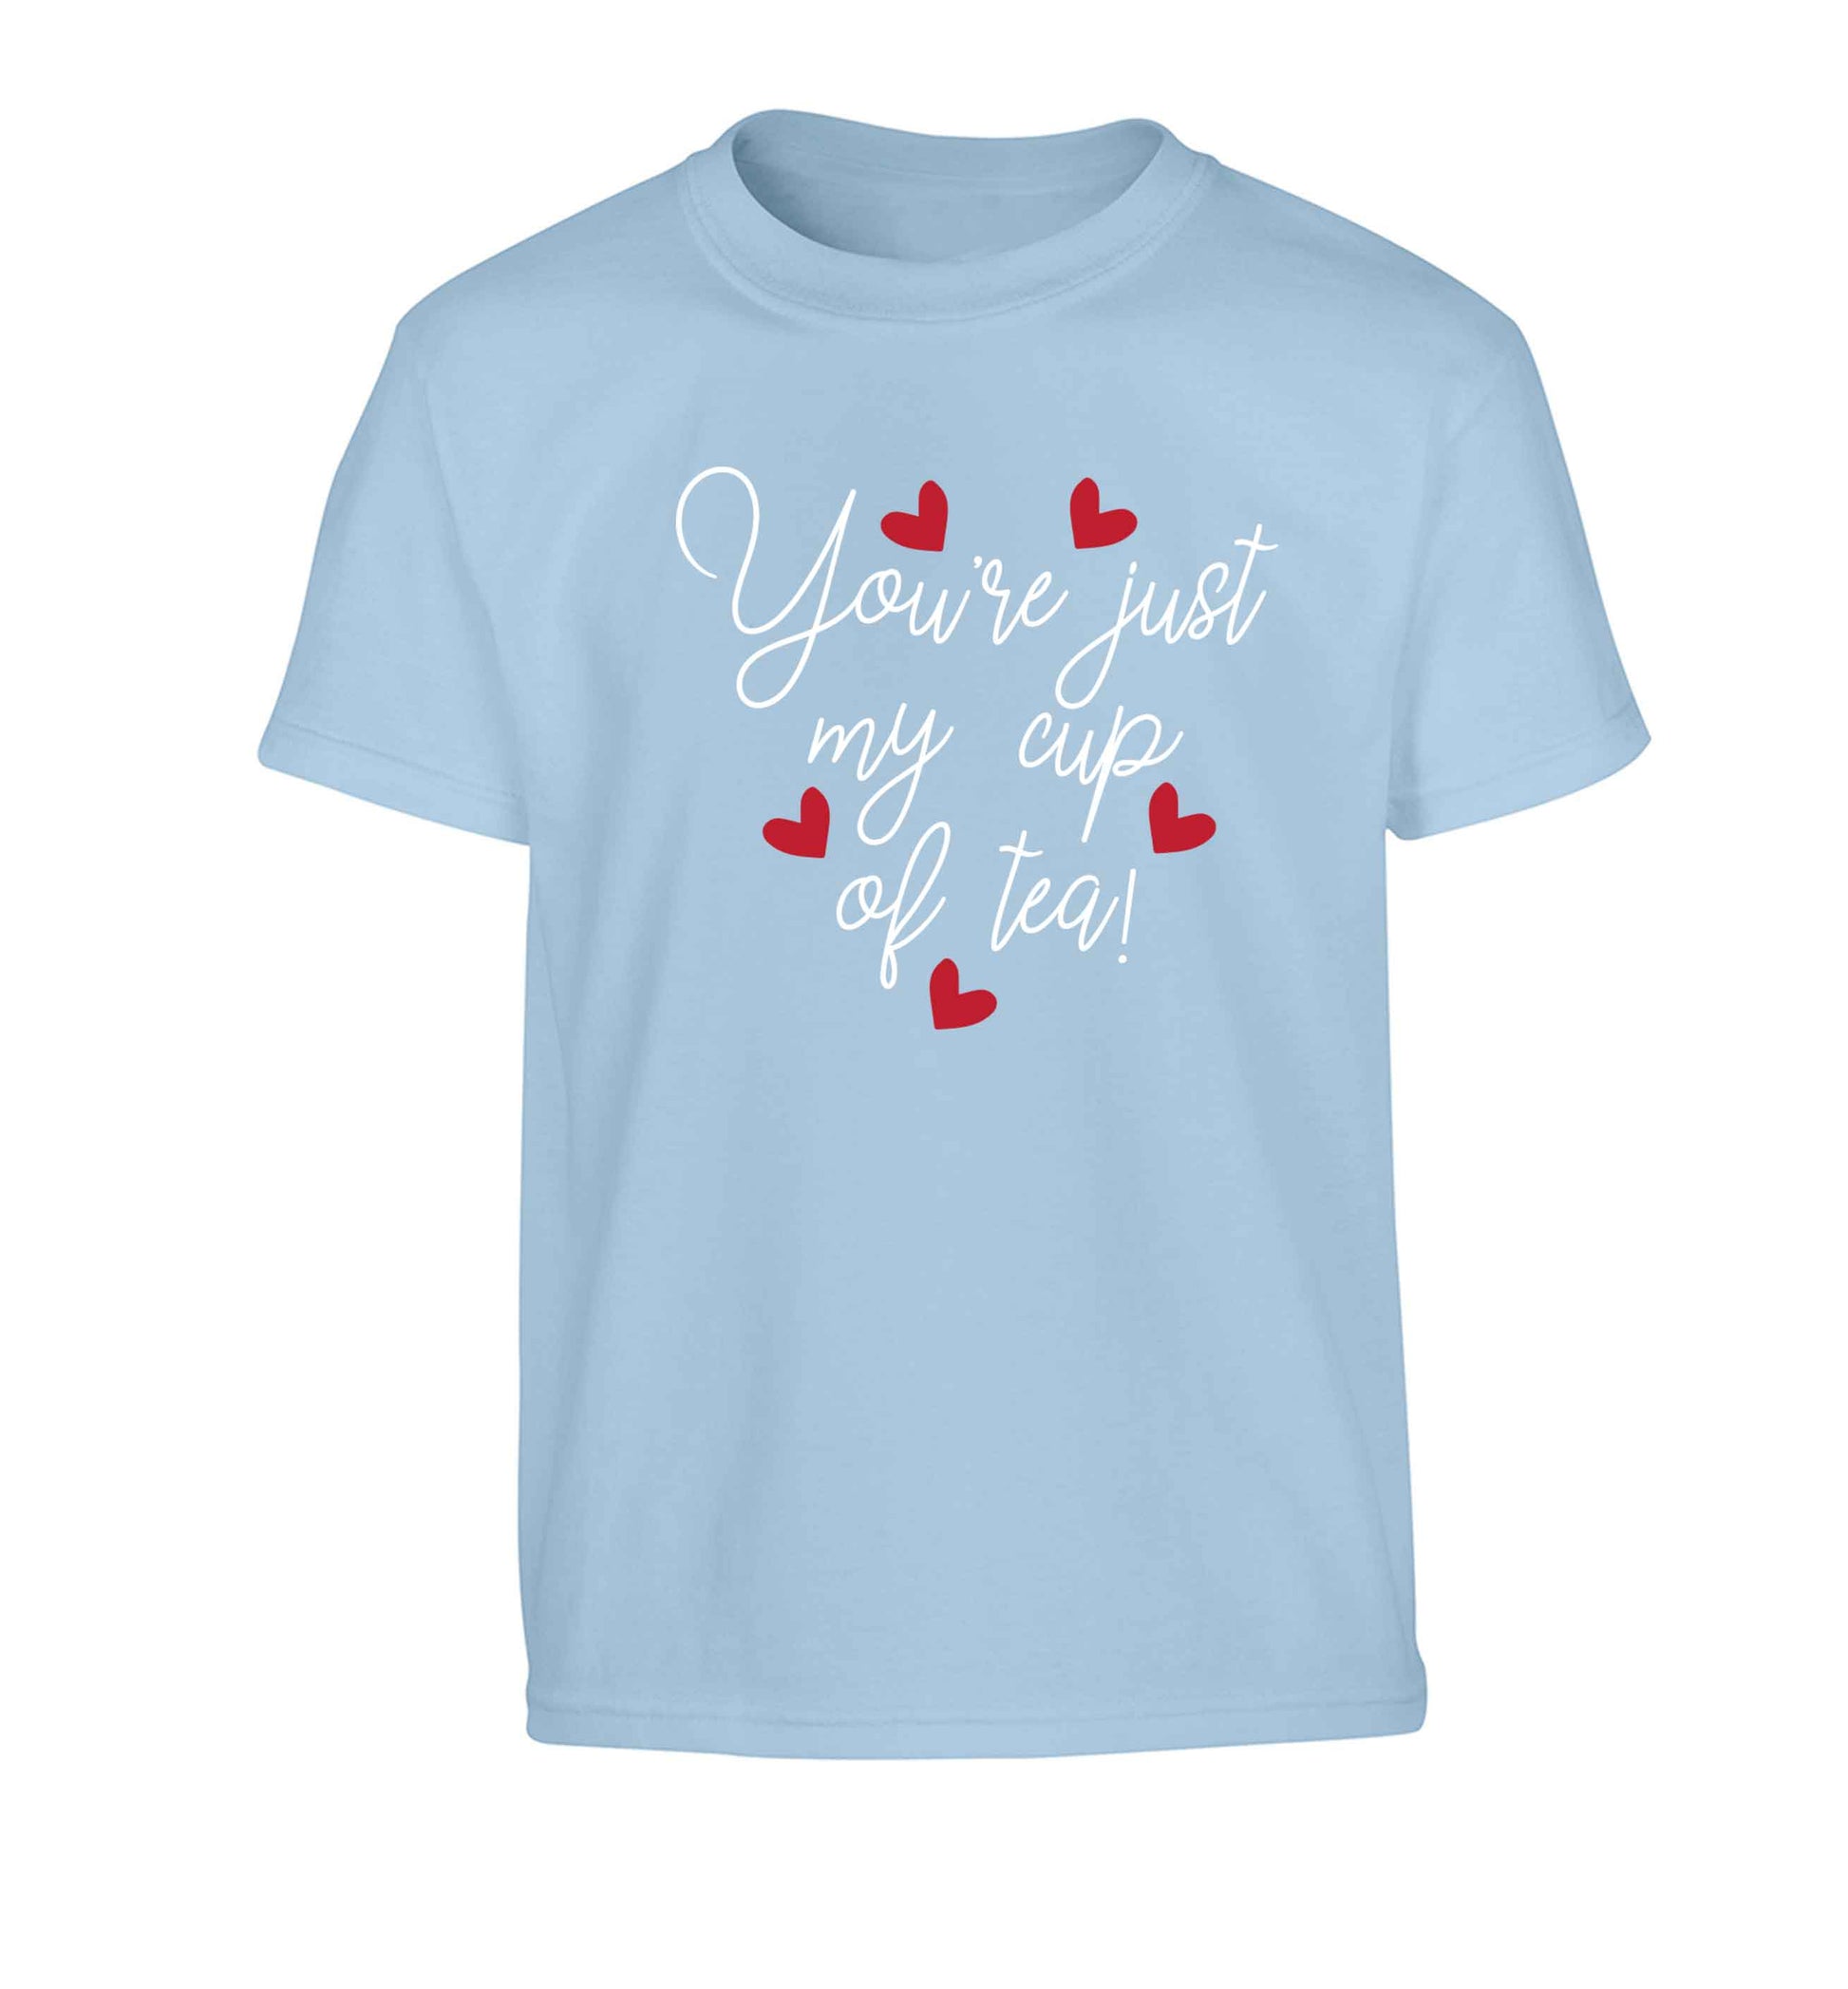 You're just my cup of tea Children's light blue Tshirt 12-13 Years